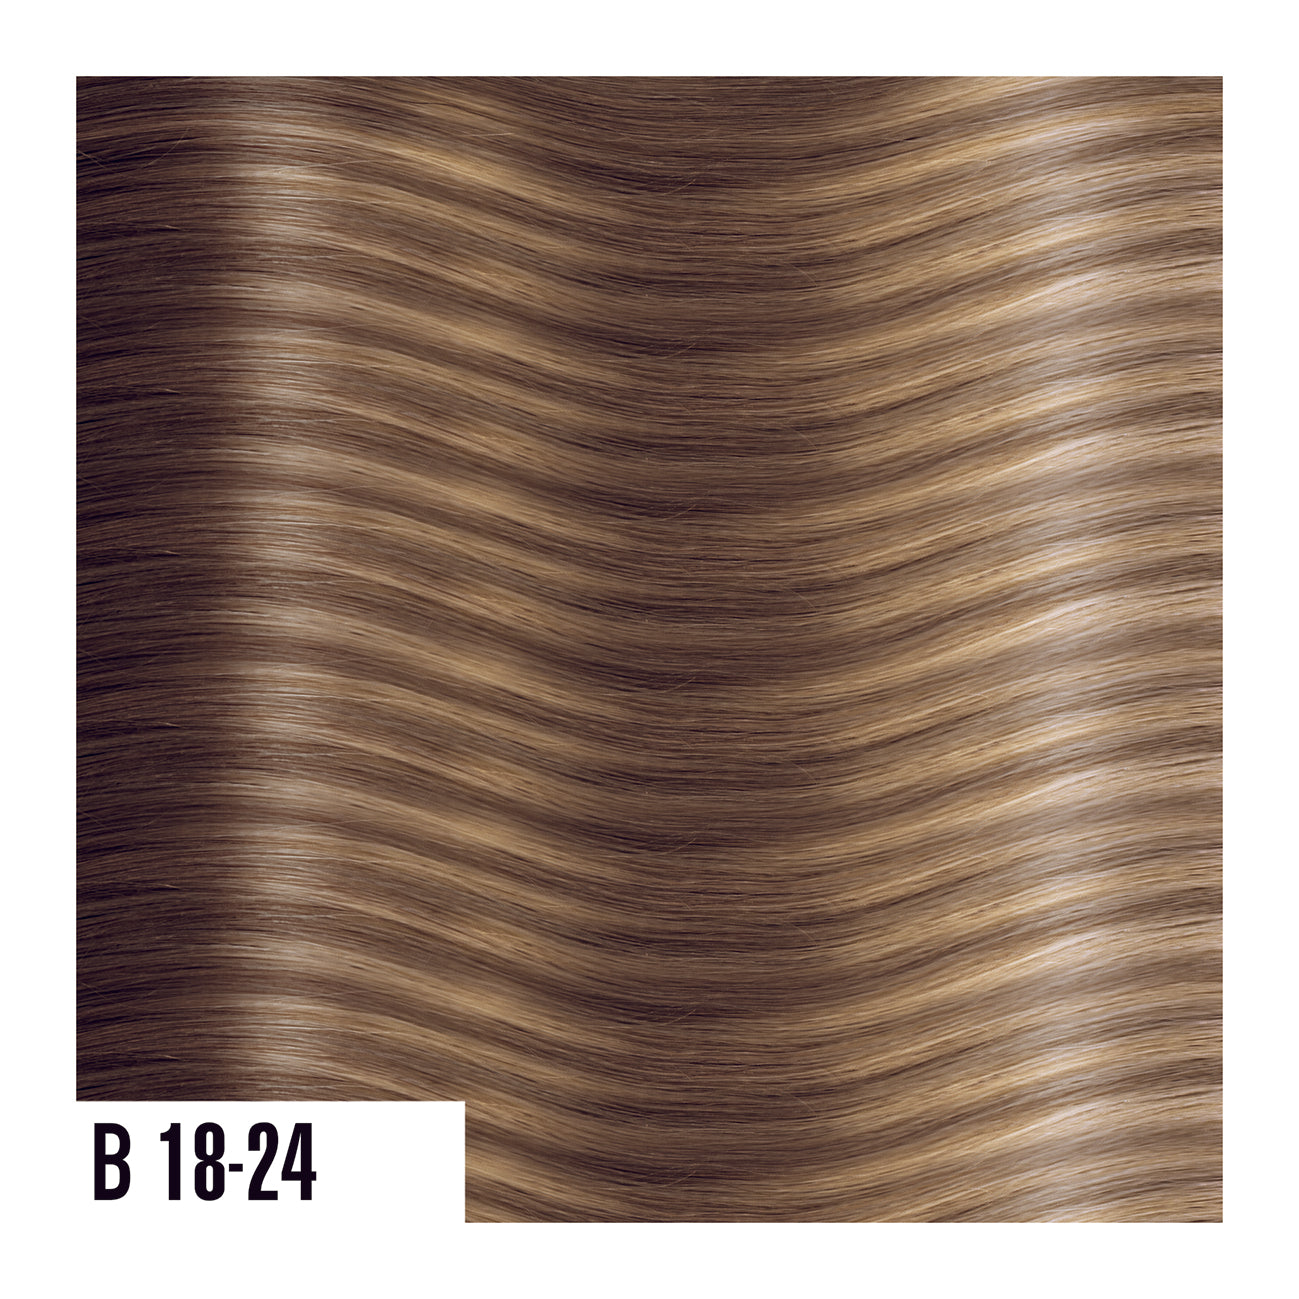 Keratin Extensions Blend of light medium brown and gold - Balayage colors are a perfect combination of natural colored roots that blends into highlighted ends. 